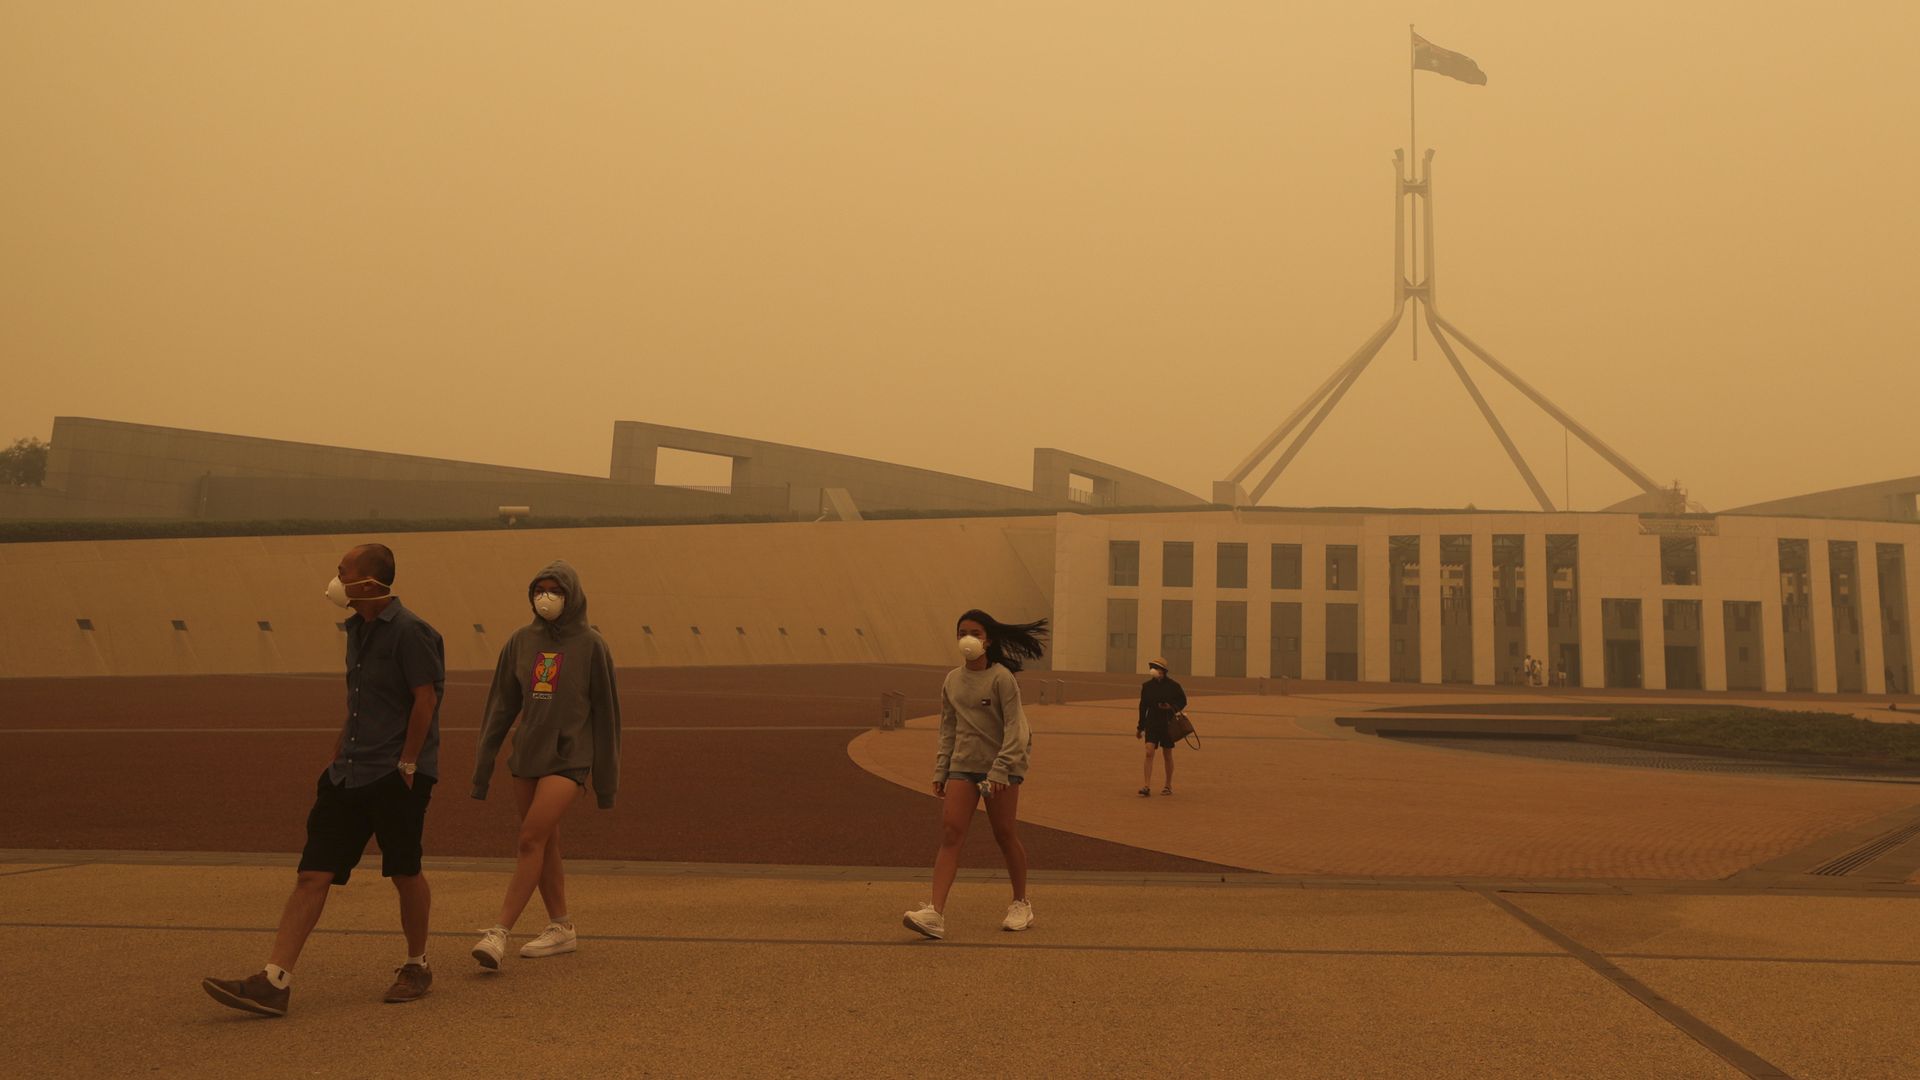 Visitors to Parliament House are forced to wear face masks after smoke from bushfires blankets Canberra in a haze with hazardous air quality on January 5, 2020 in Canberra, Australia